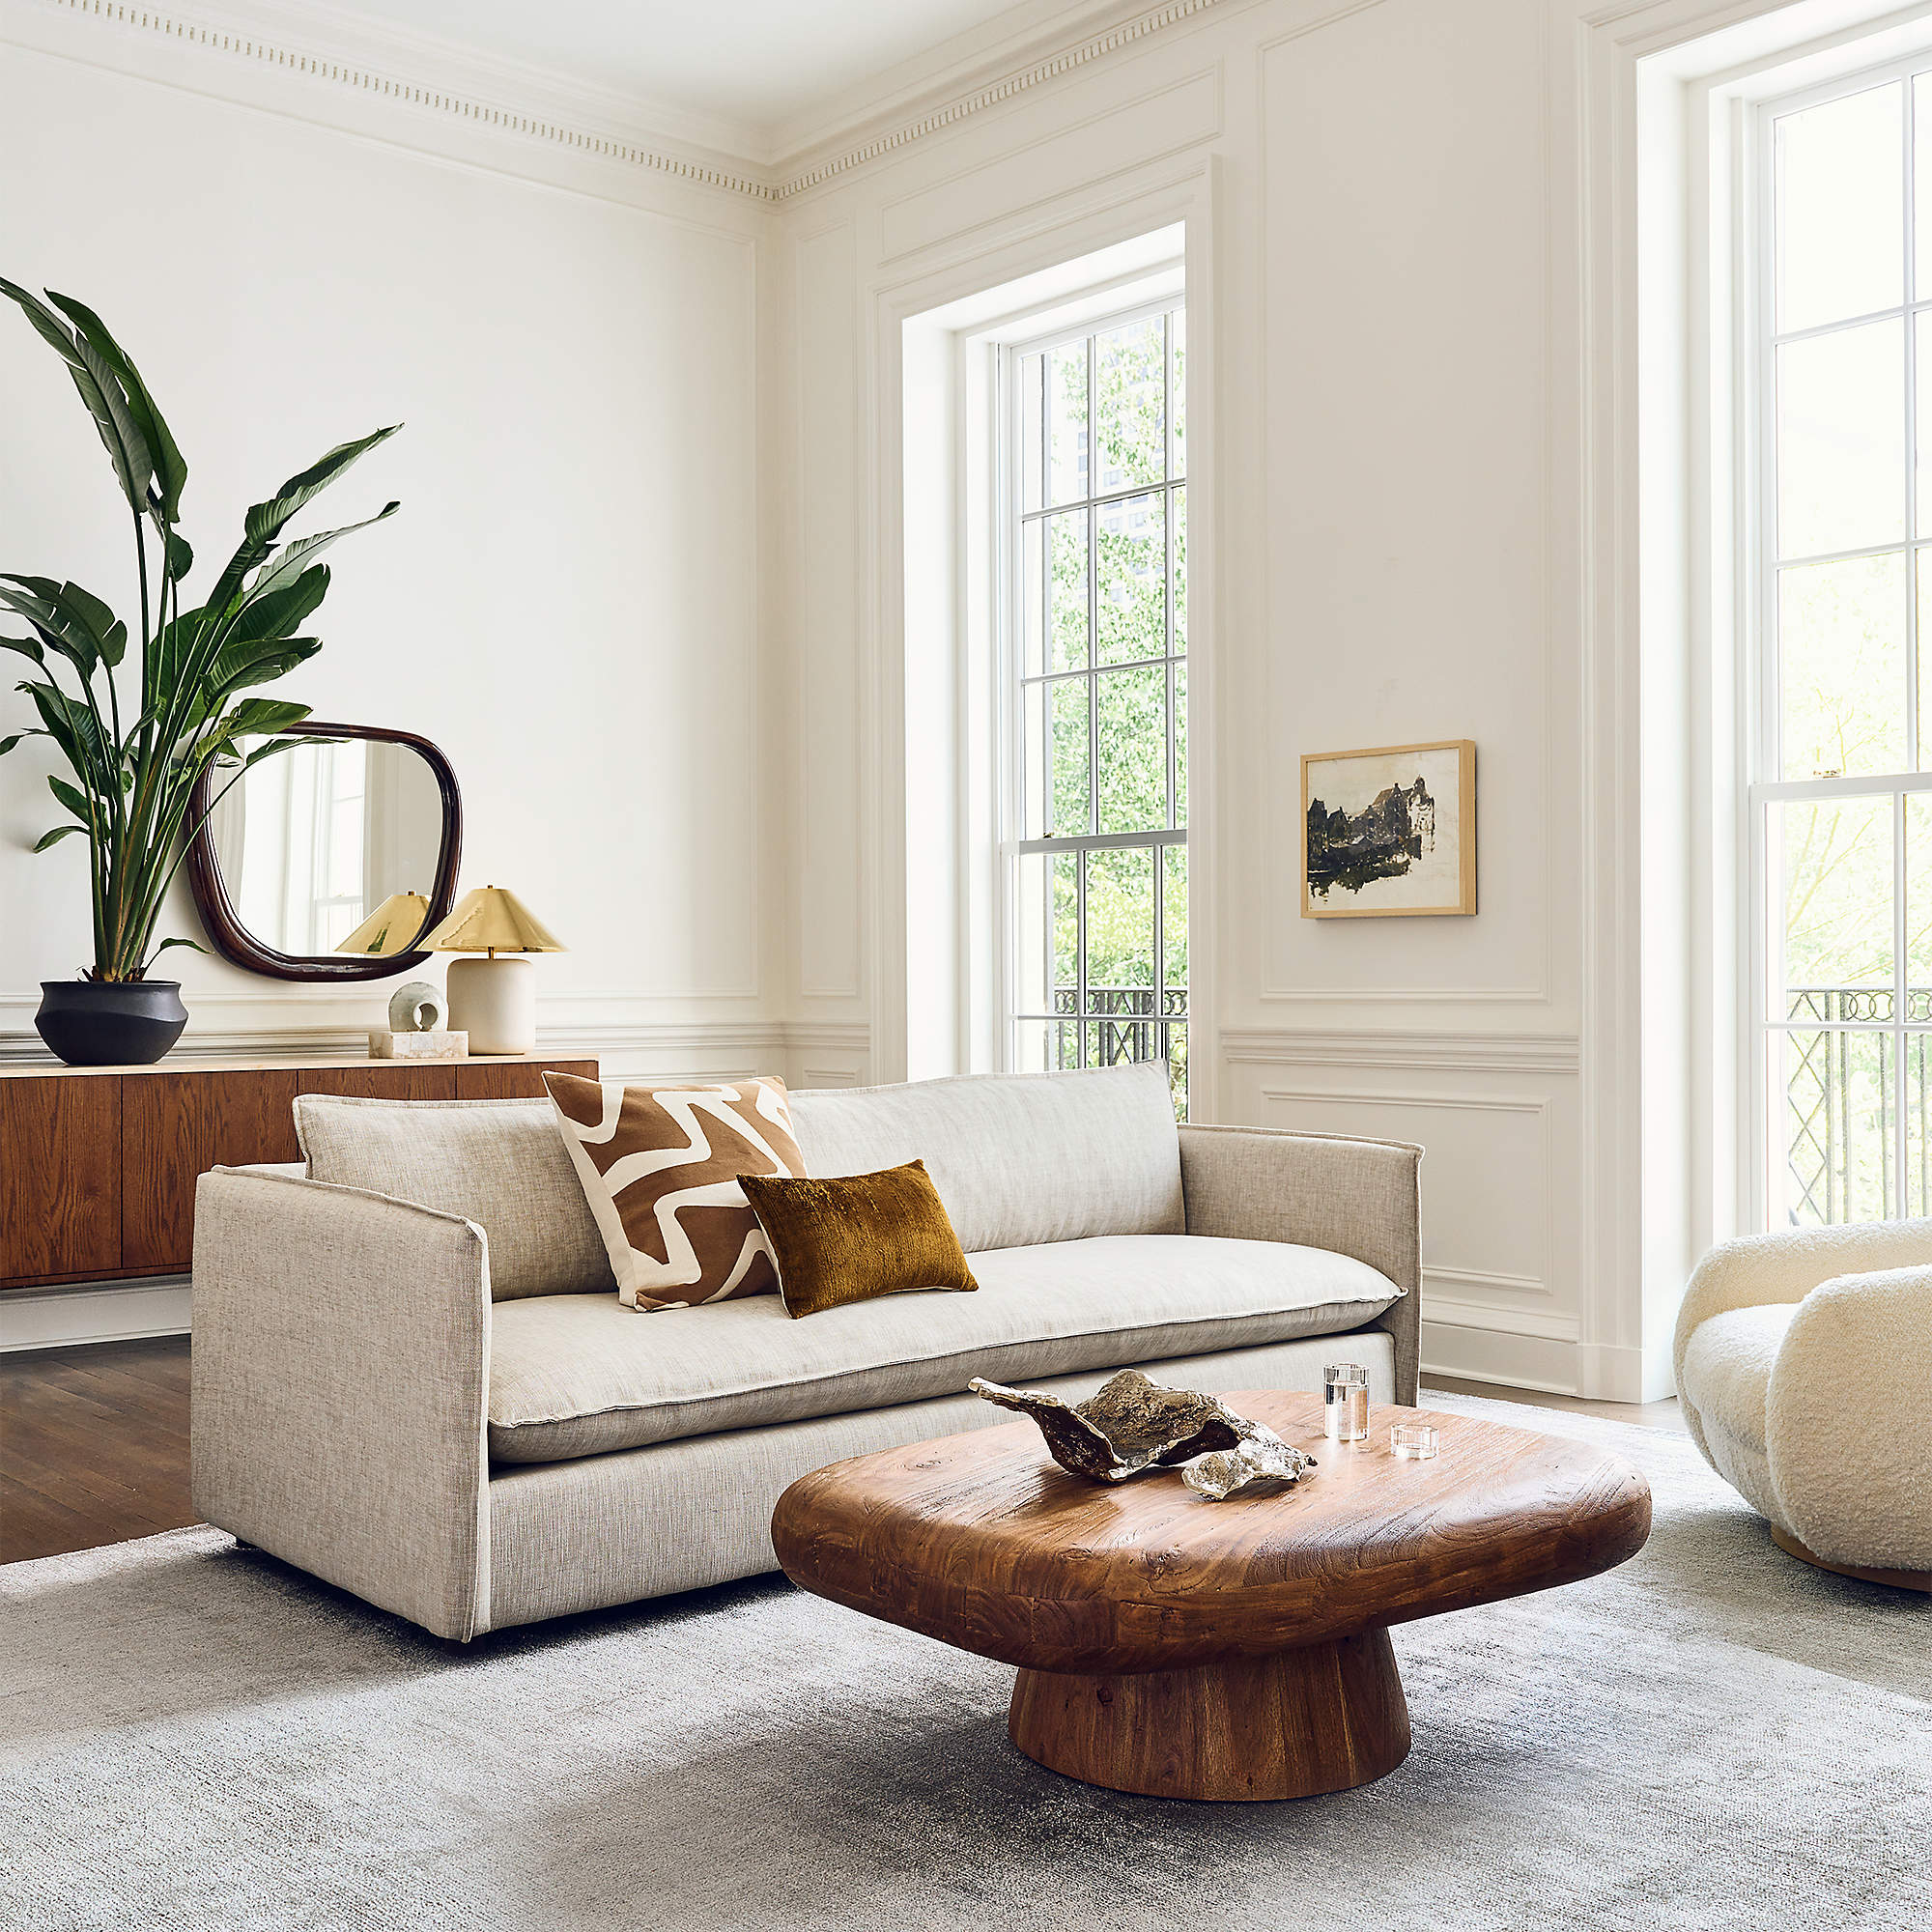 A bright, modern living room features a beige sofa with yellow and white pillows, a wooden coffee table, and a cozy armchair. Large windows allow natural light to flood the space. A wooden console table with plants and a mirror is positioned behind the sofa.